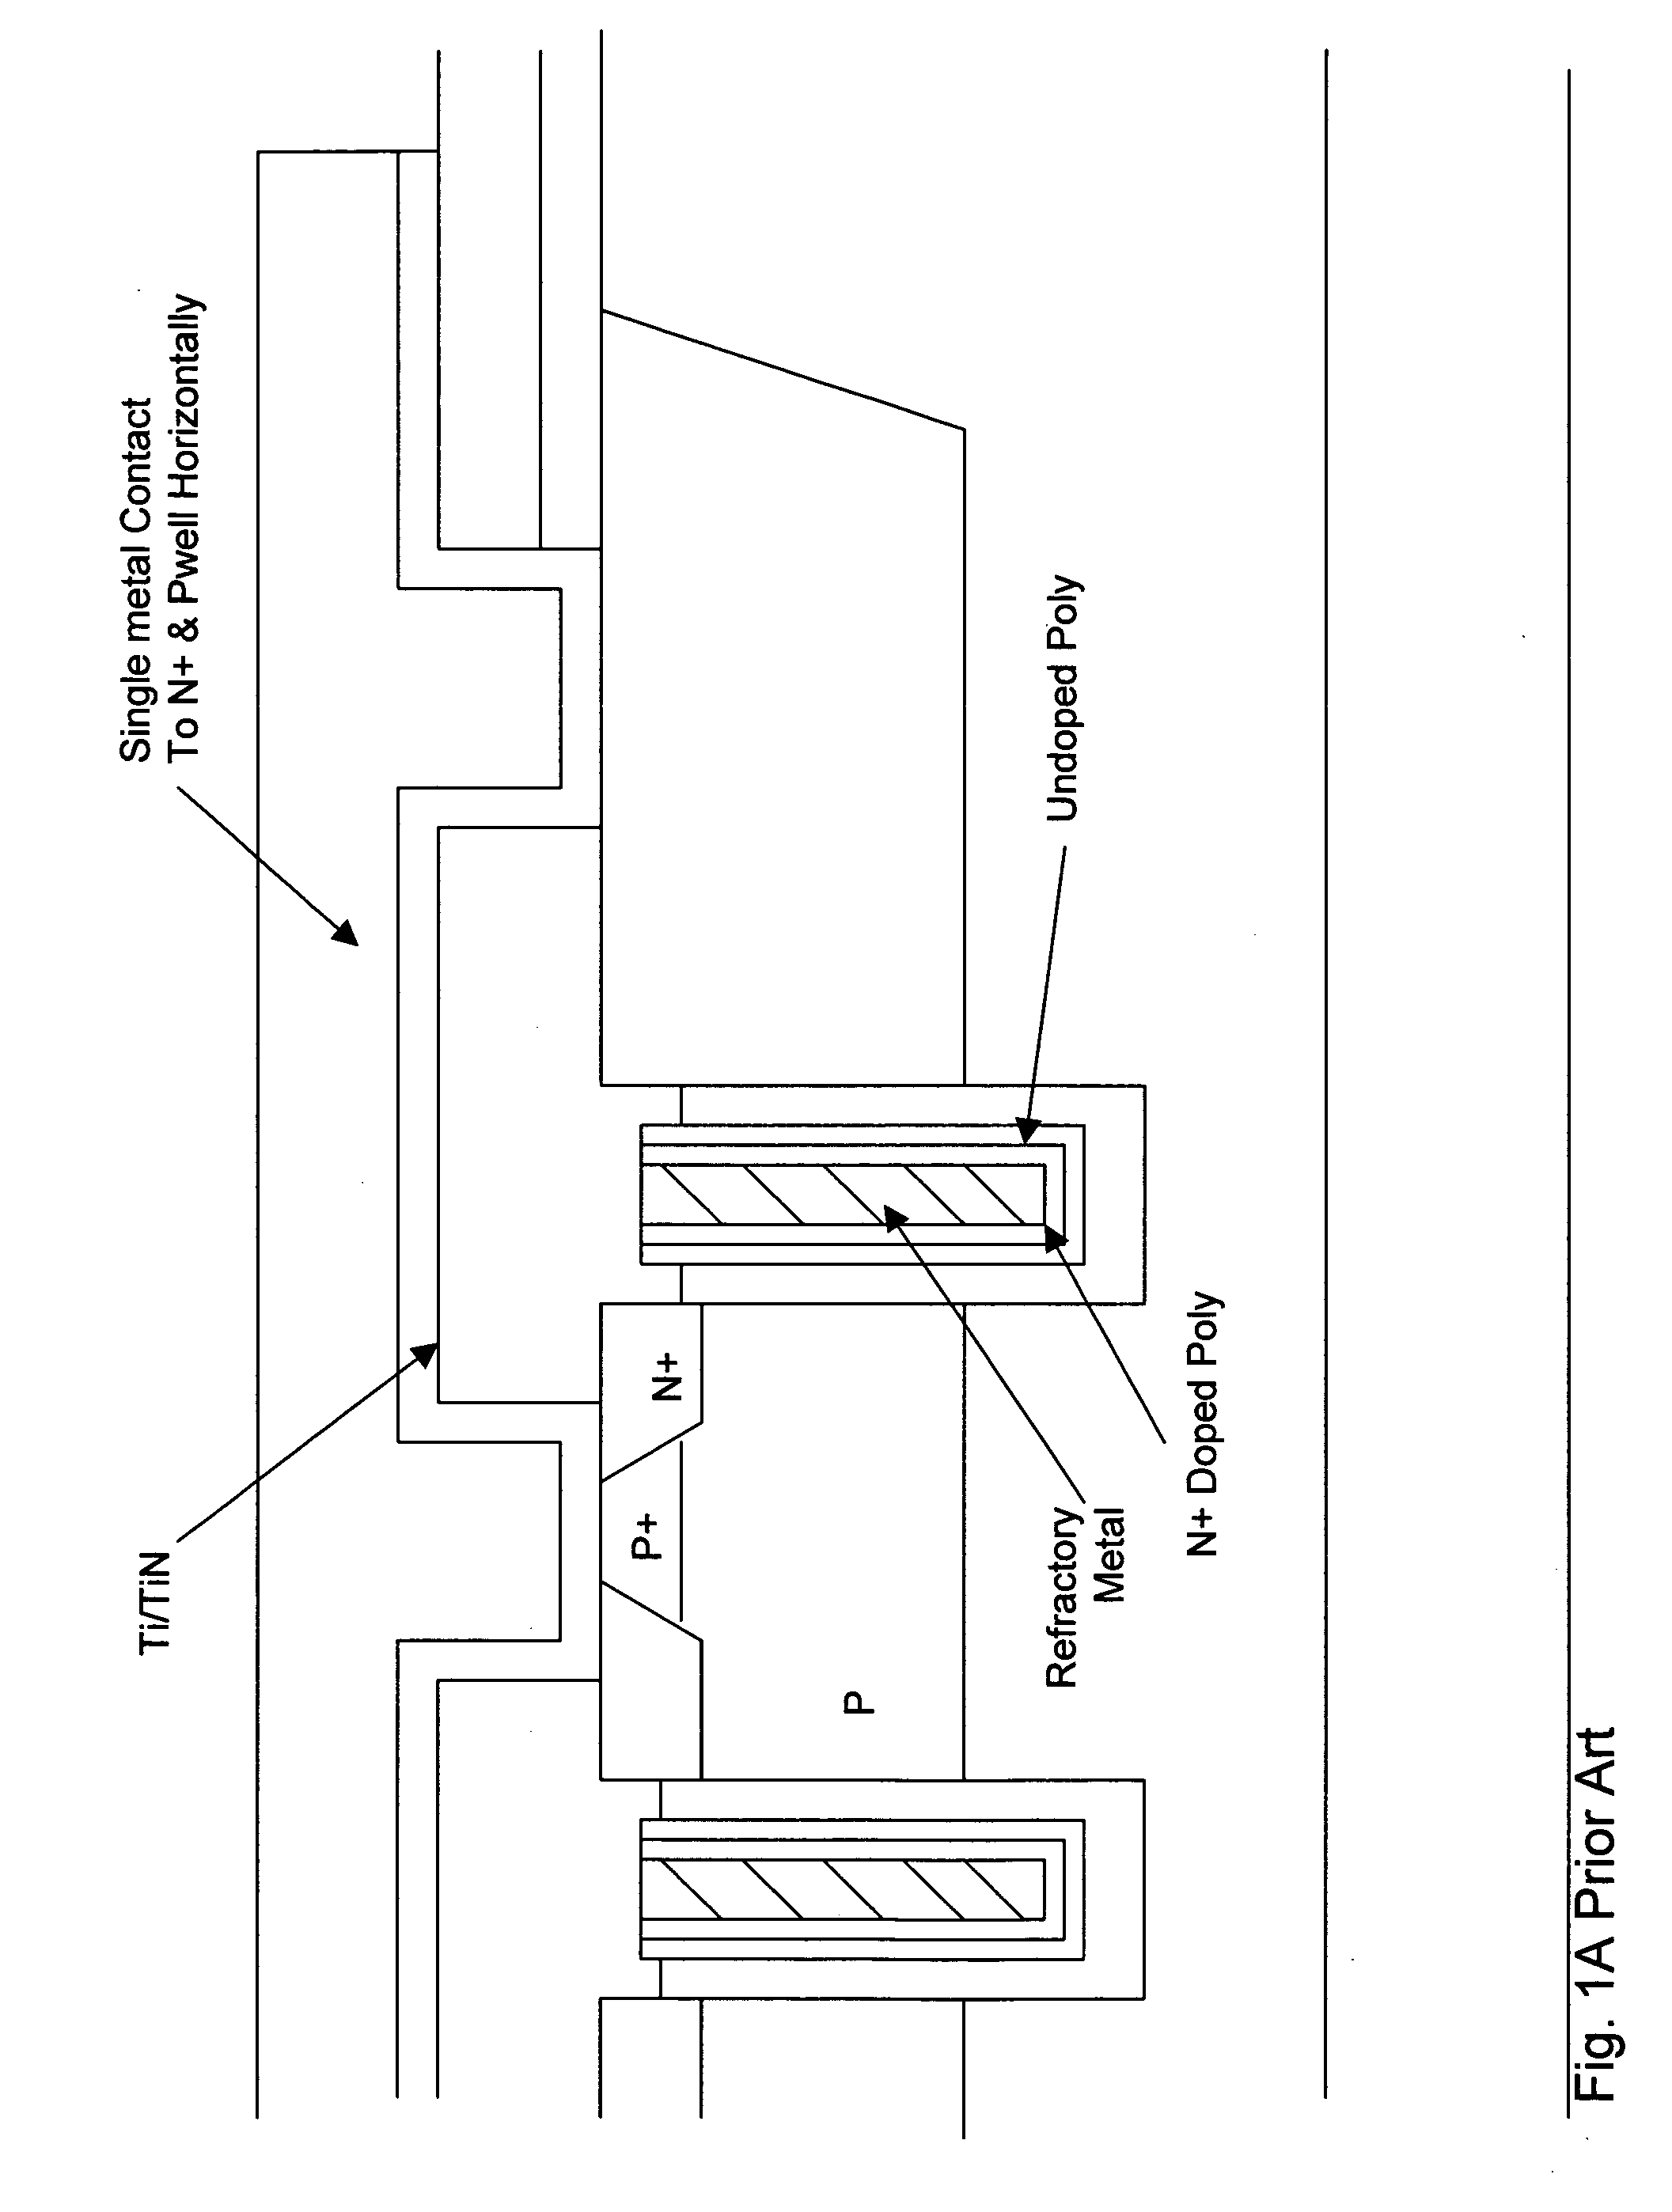 High density trench MOSFET with low gate resistance and reduced source contact space